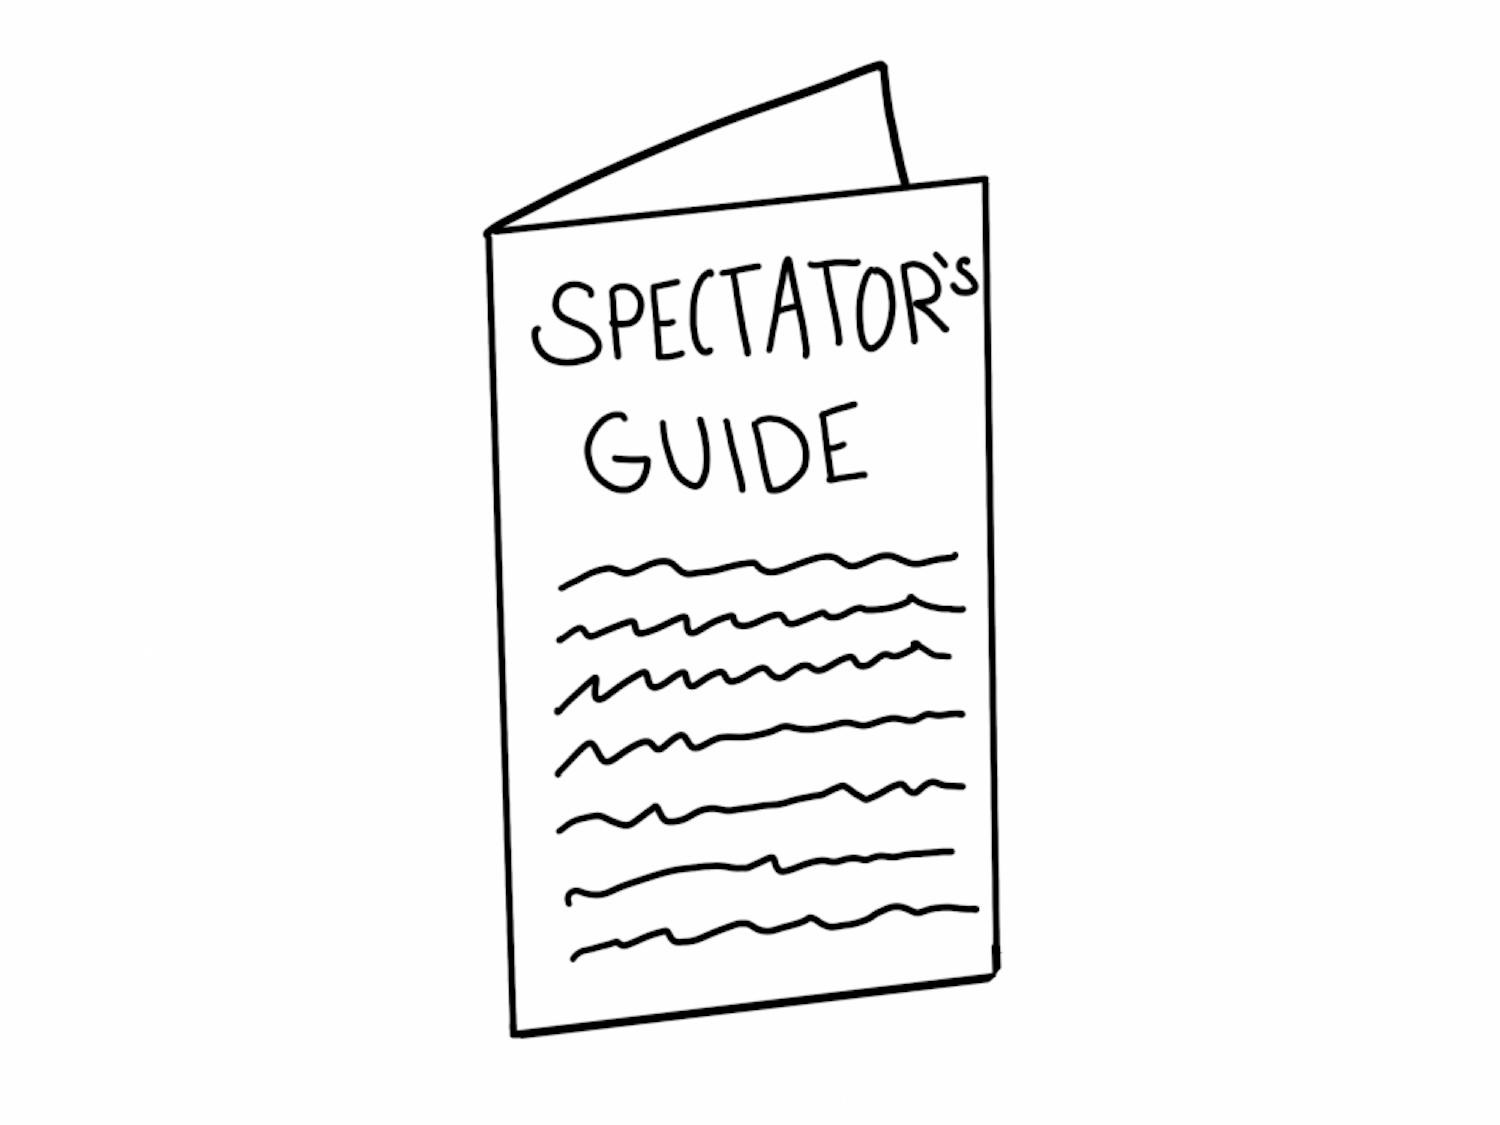 Spectators_guide_by_Sabrina_Templeton